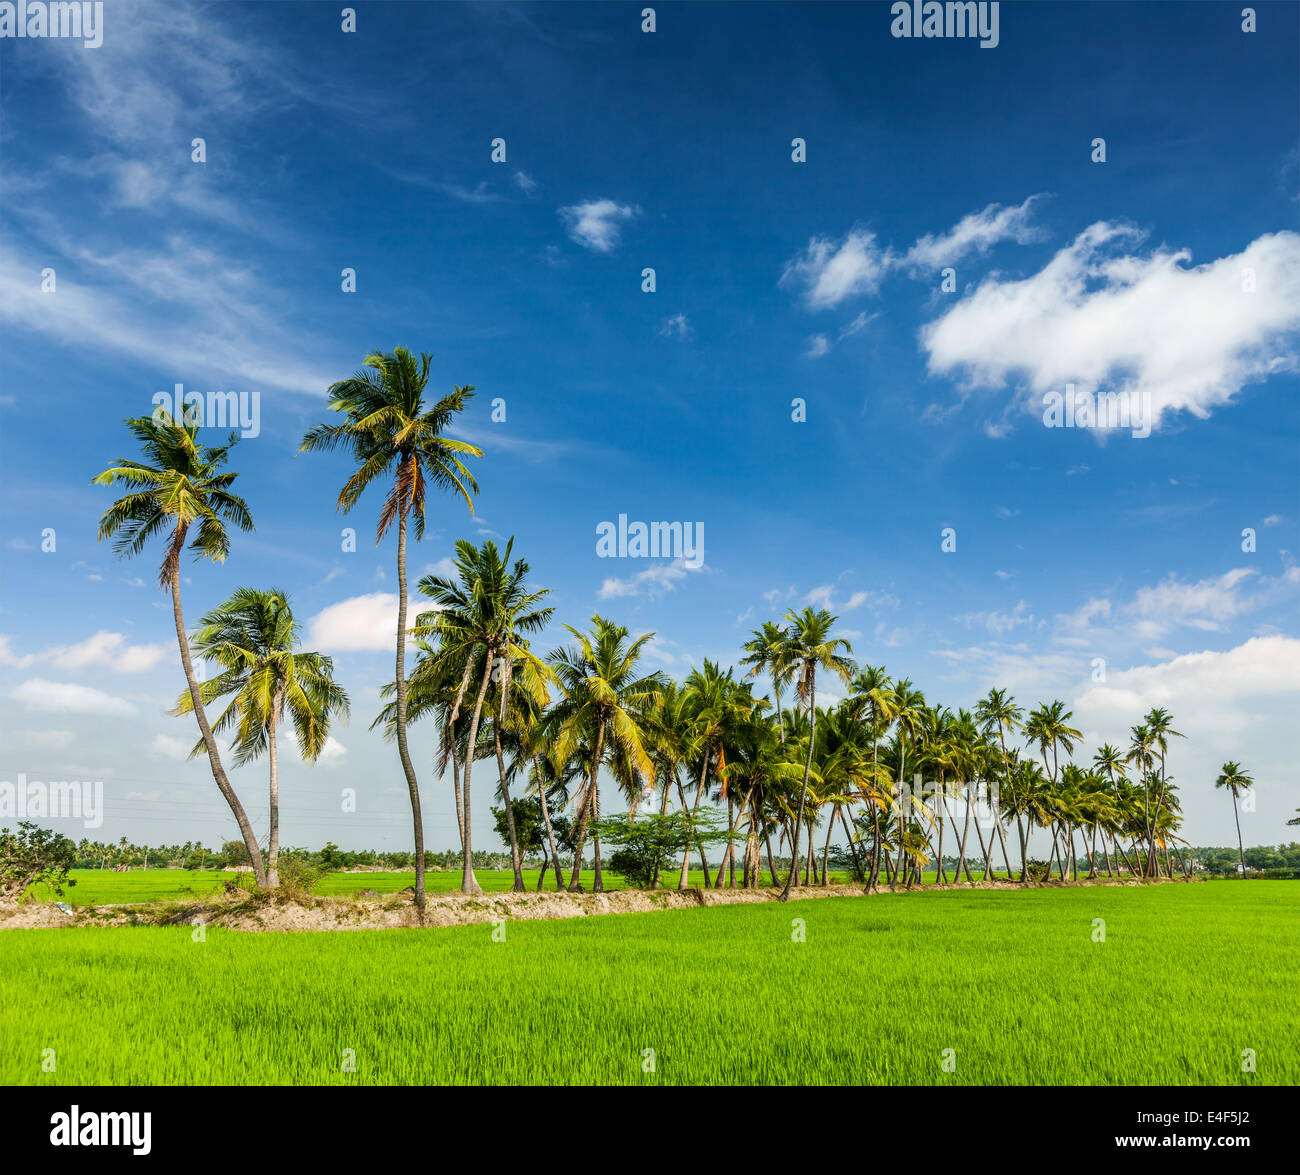 Rural Indian scene - rice paddy field and palms. Tamil Nadu, India Stock Photo